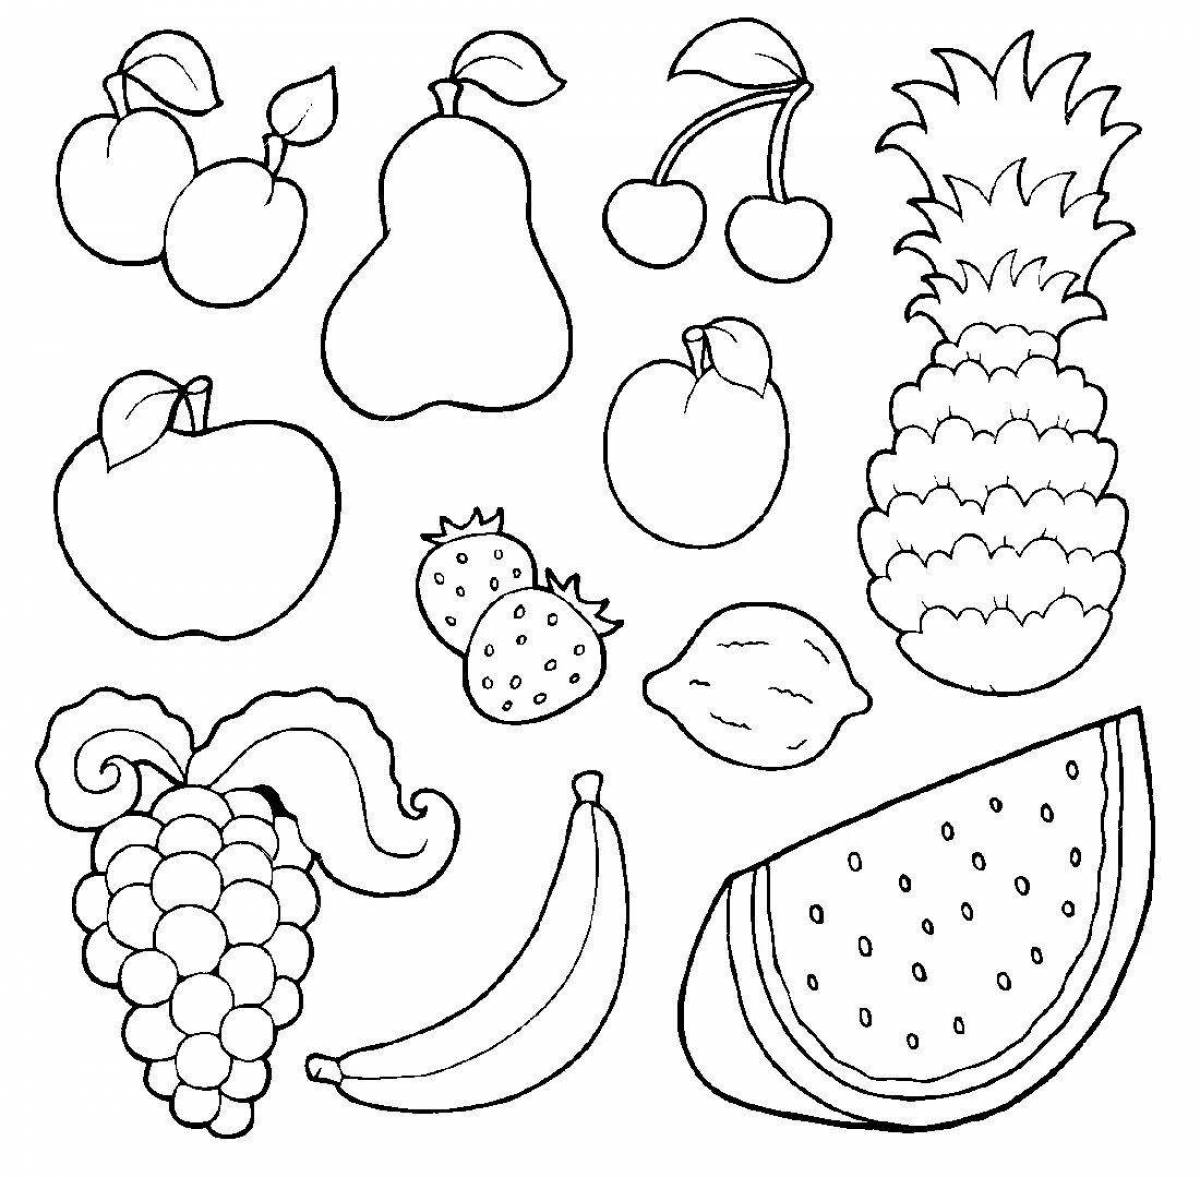 Amazing fruits and vegetables coloring book